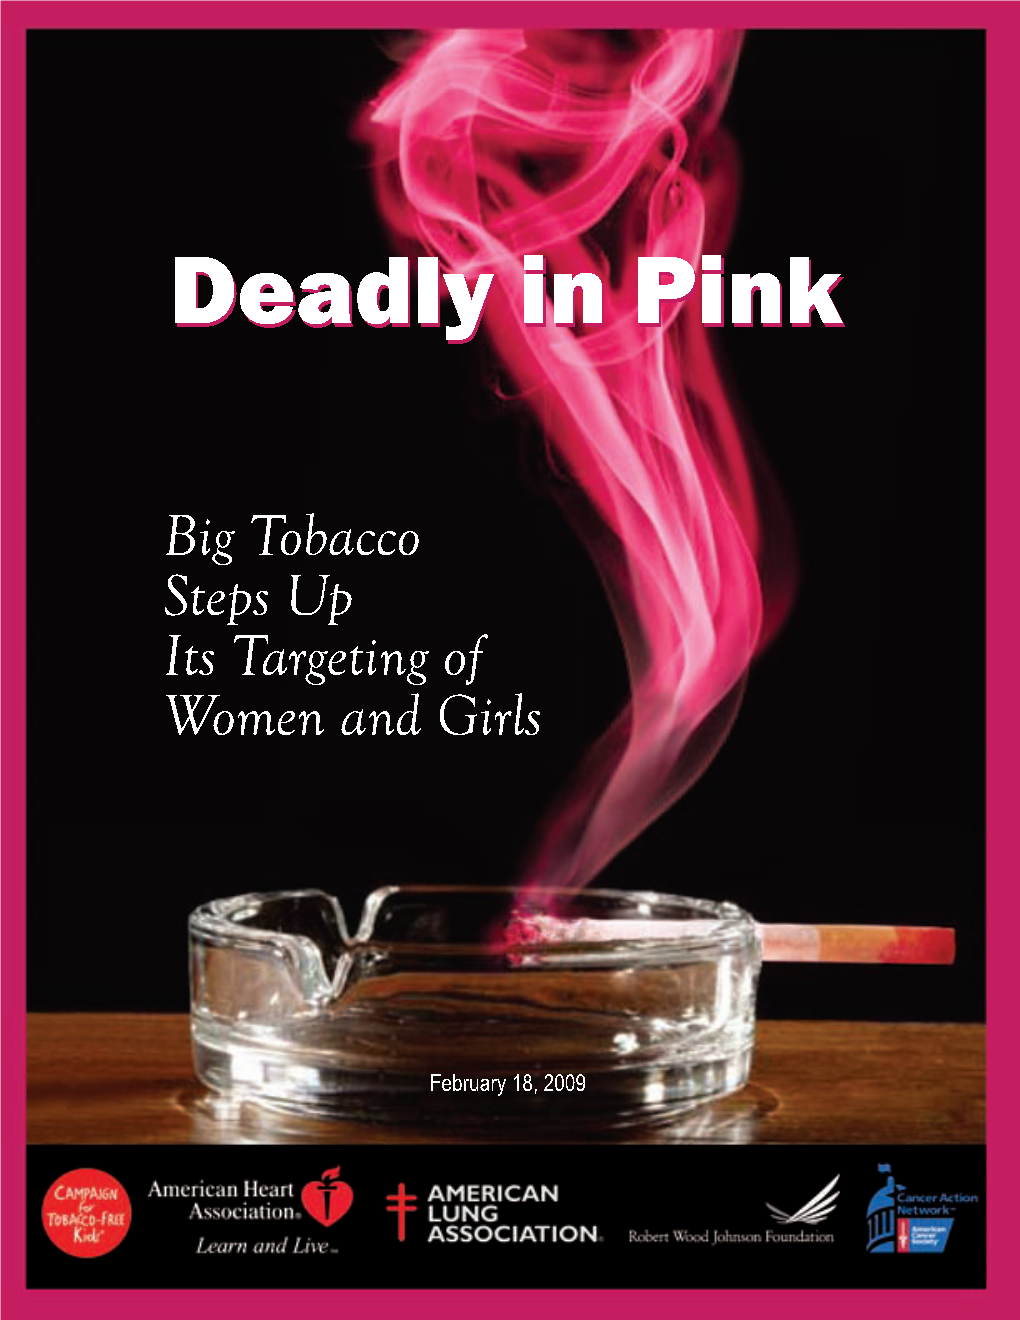 Big Tobacco Steps up Its Targeting of Women and Girls